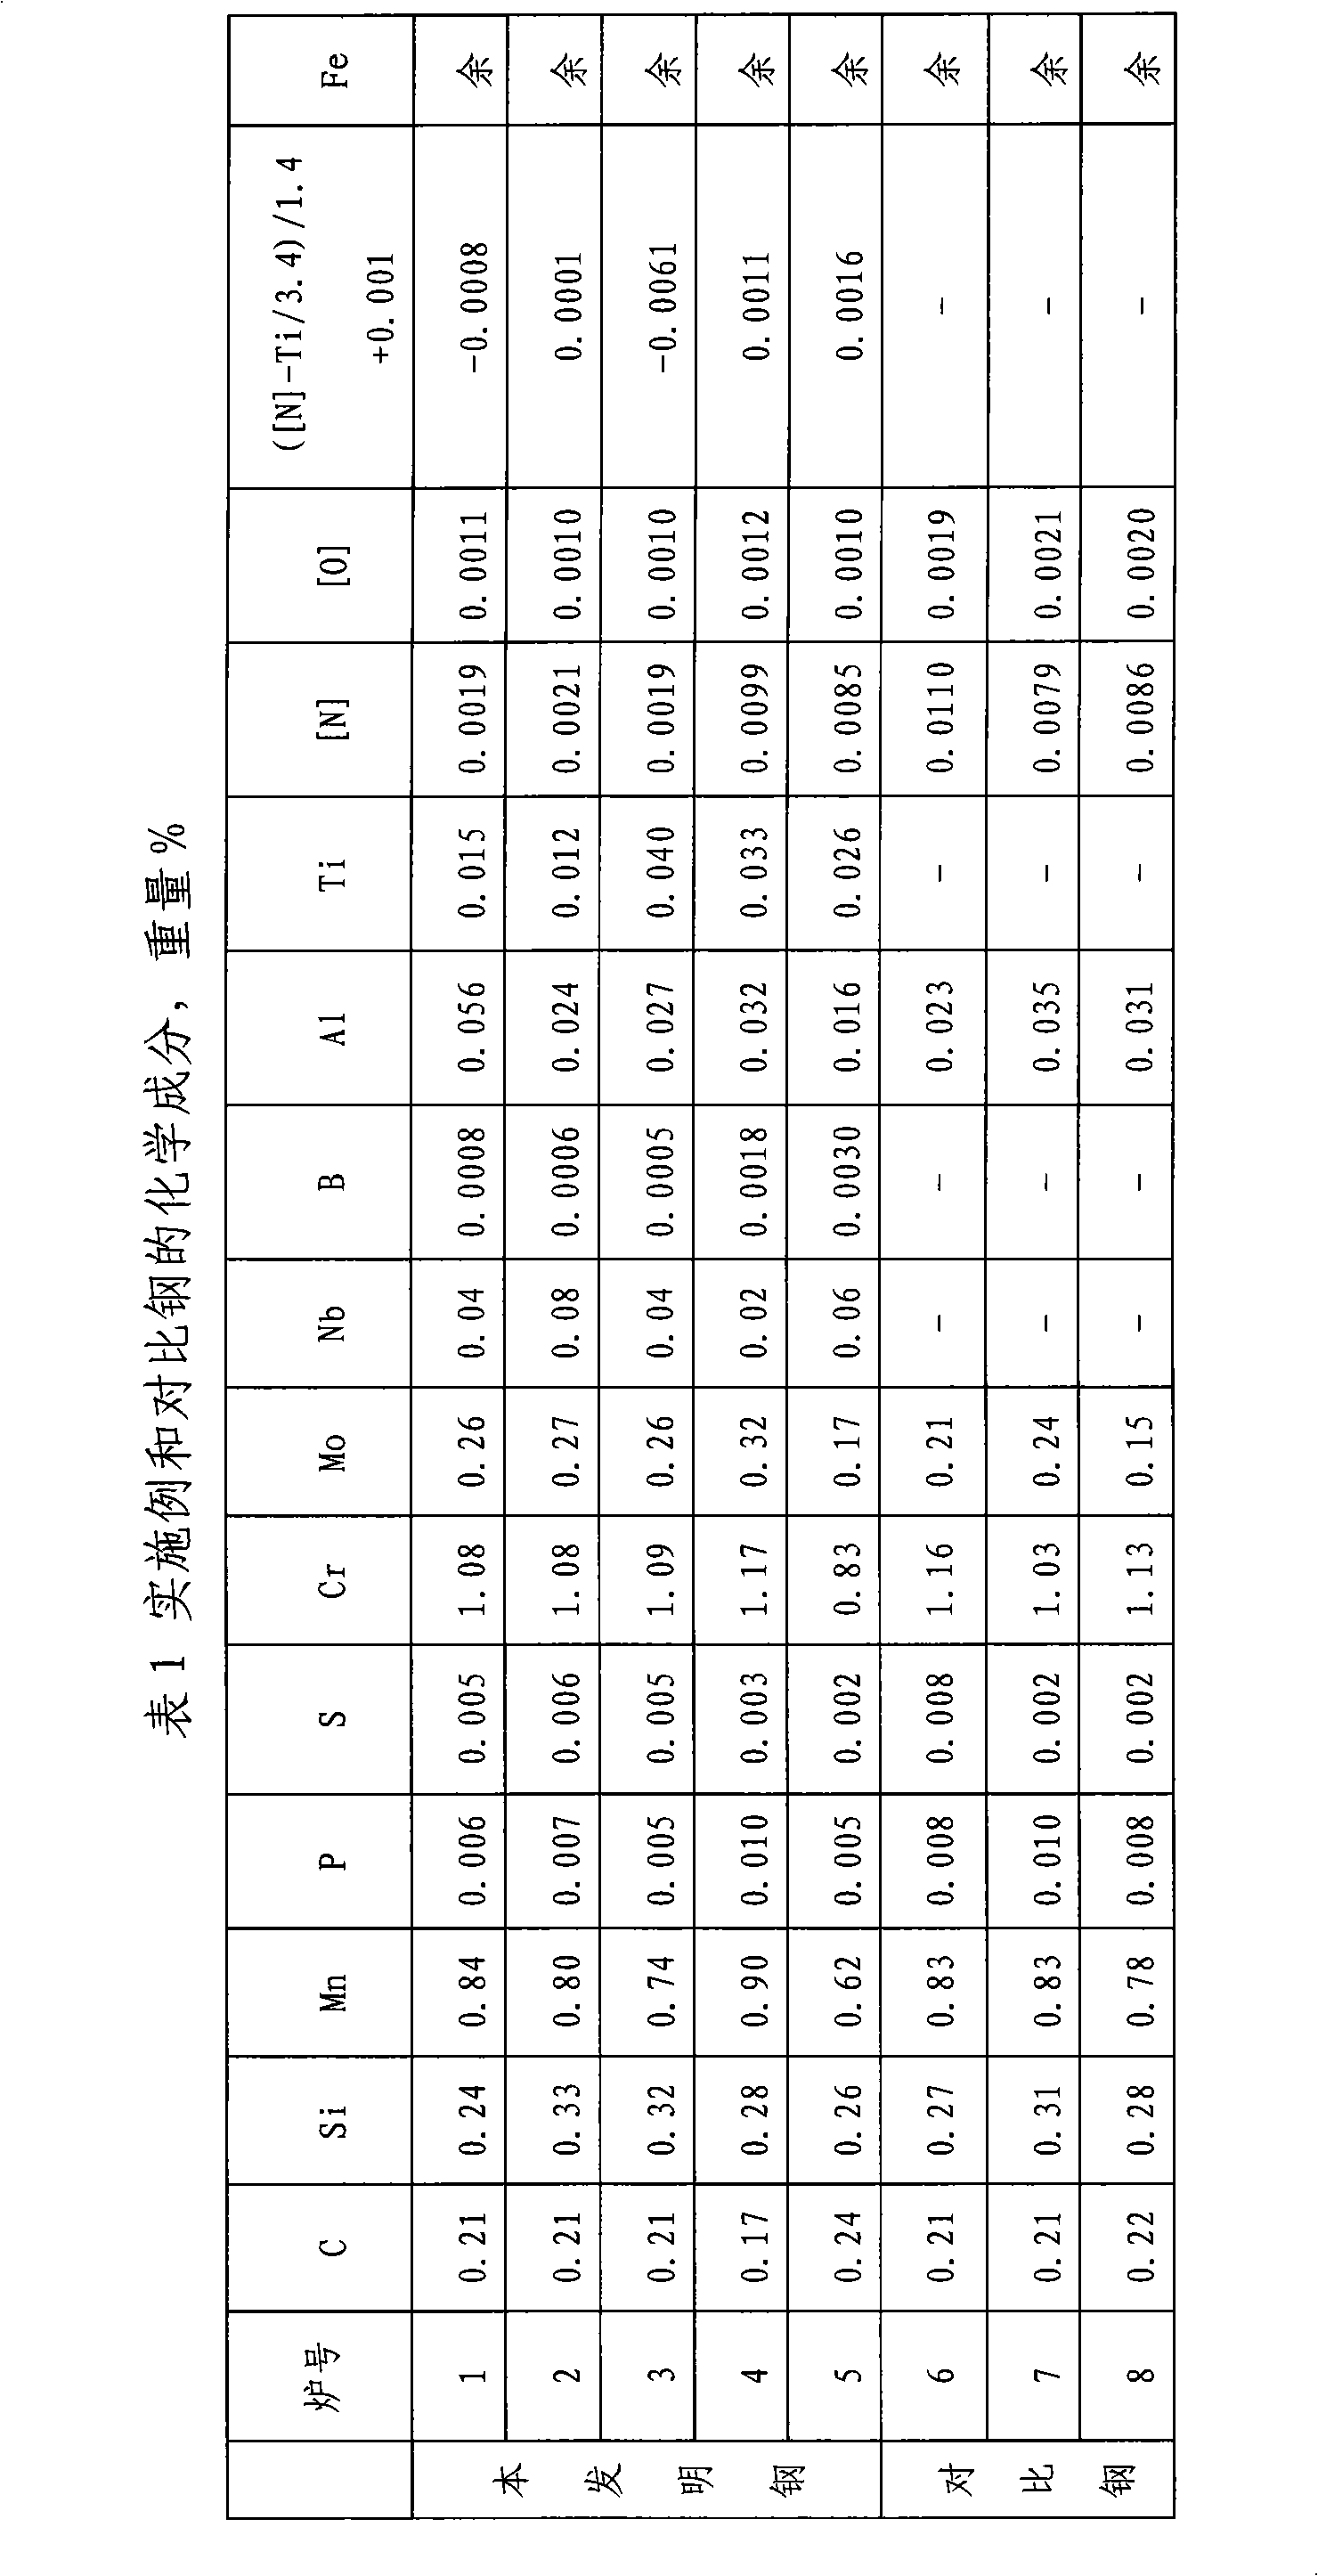 Steel for fine grain carburizing gear and method of manufacturing the same